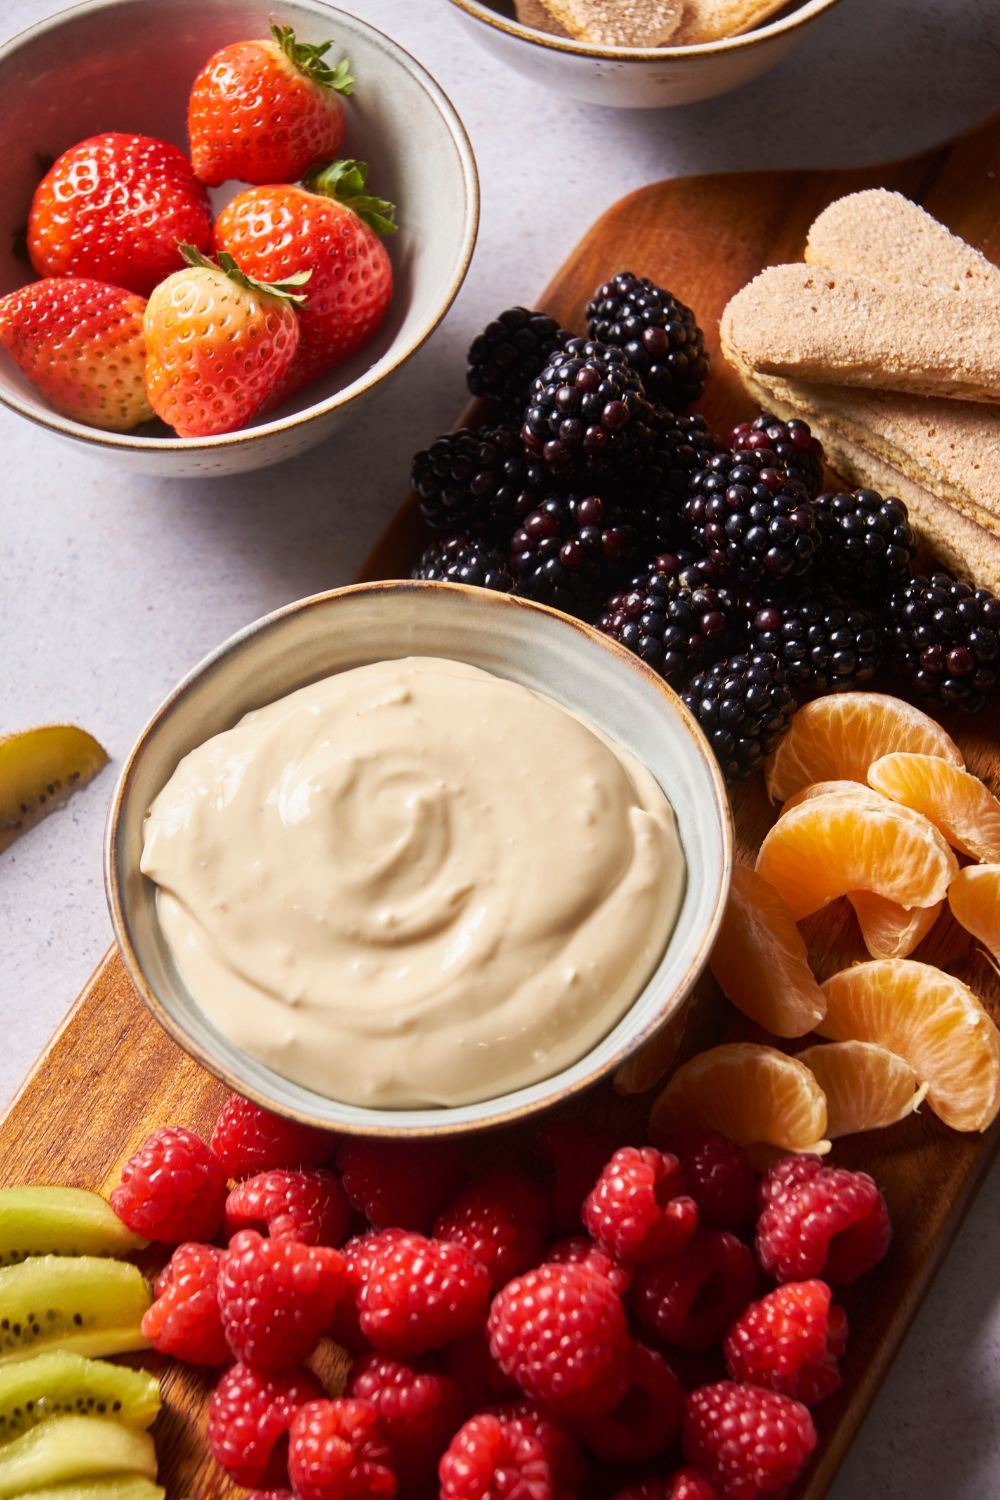 Cream cheese dip in a serving bowl on a wood board filled with fresh fruit.